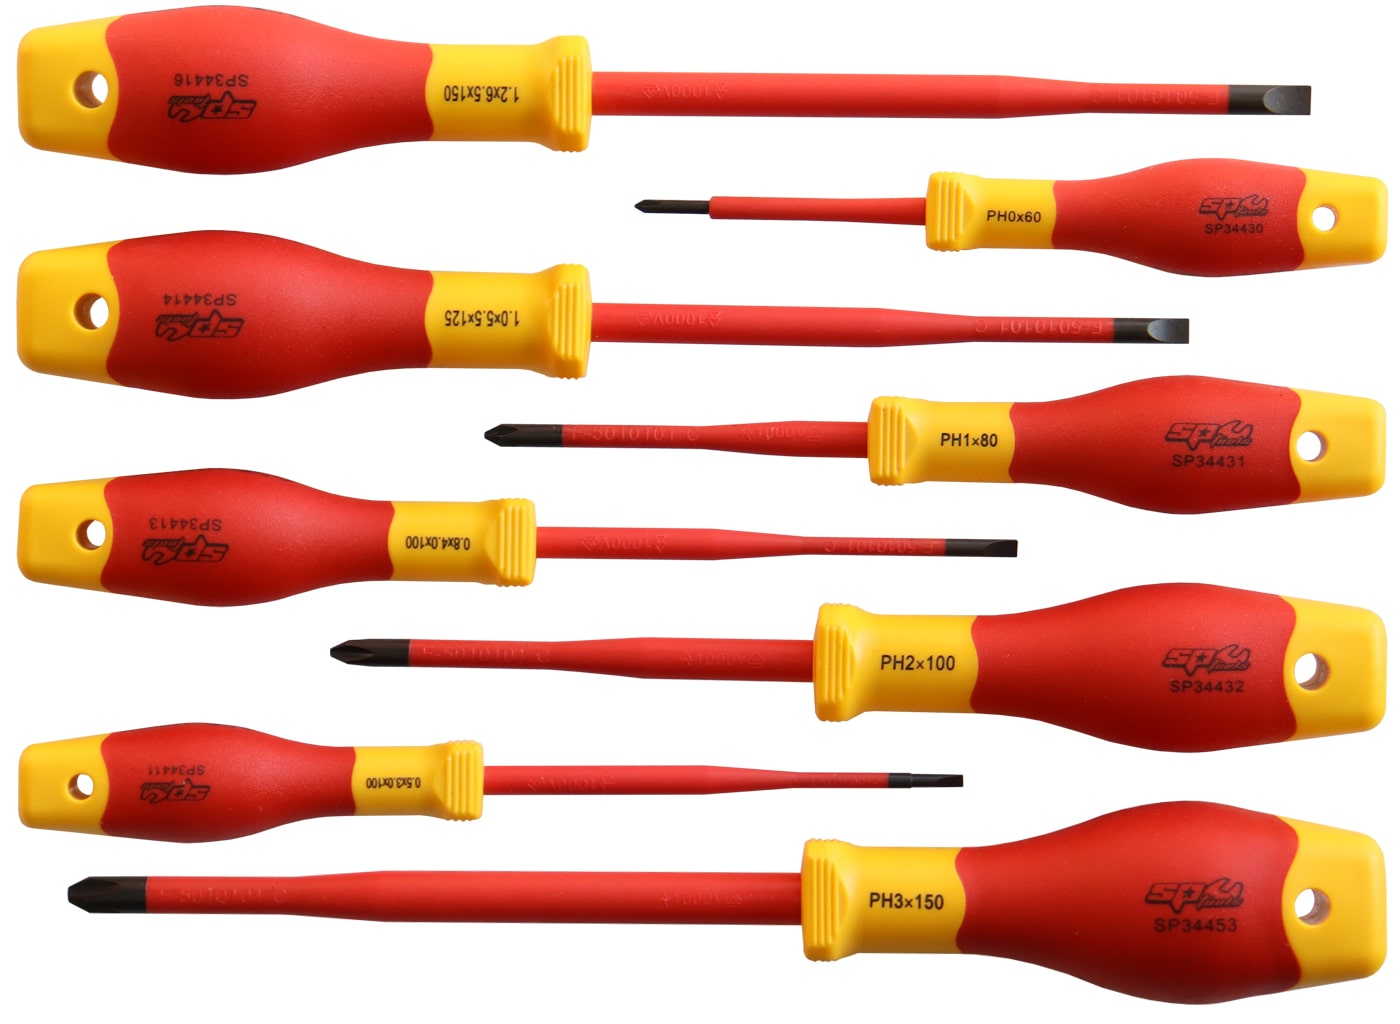 VDE Insulated Electrical Screwdriver Set 8Pce - SP34041 by SP Tools